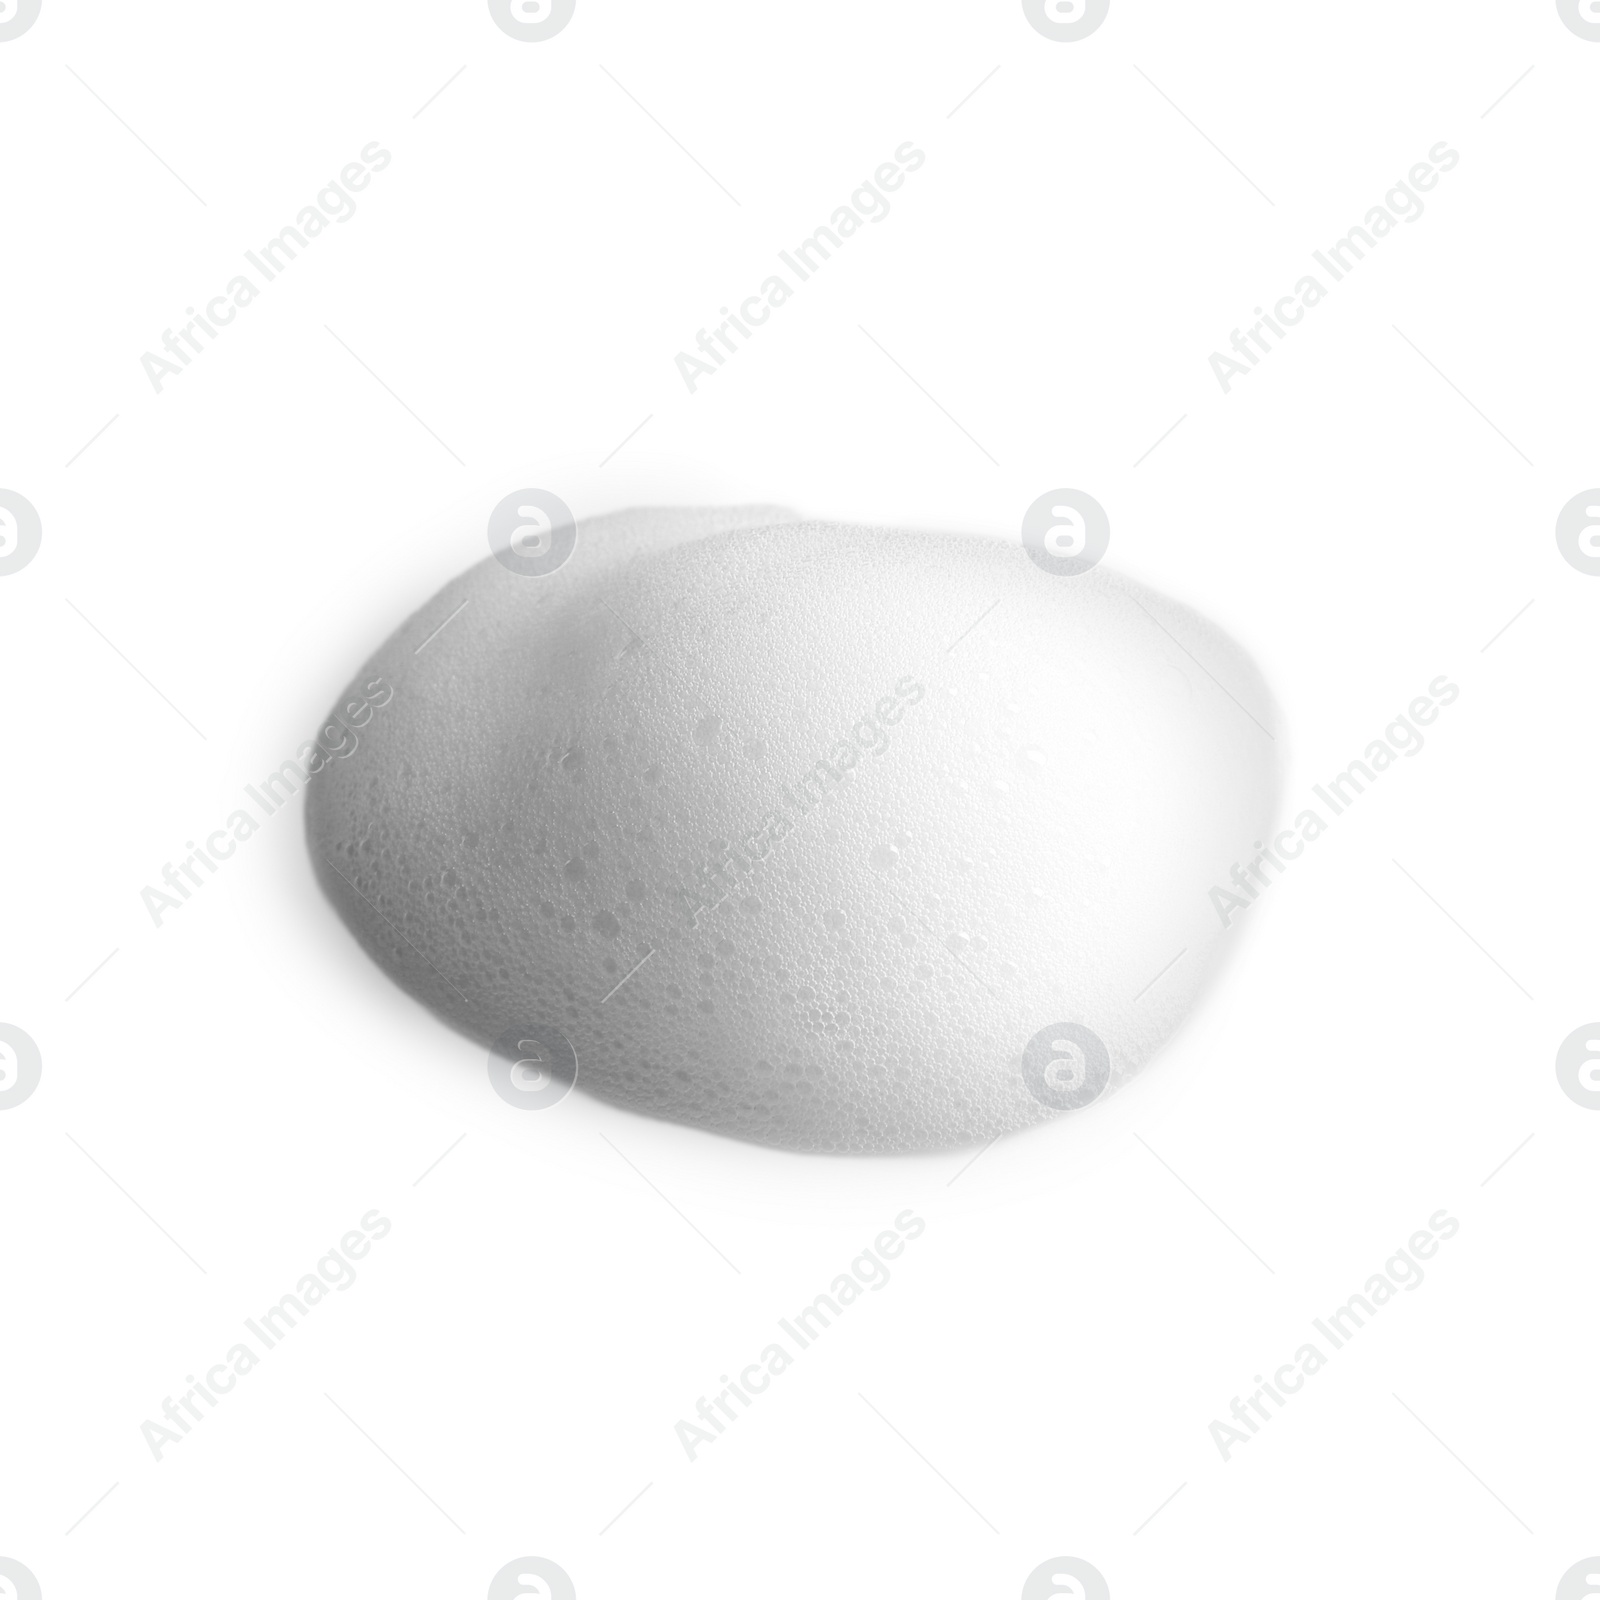 Photo of Drop of soap foam on white background